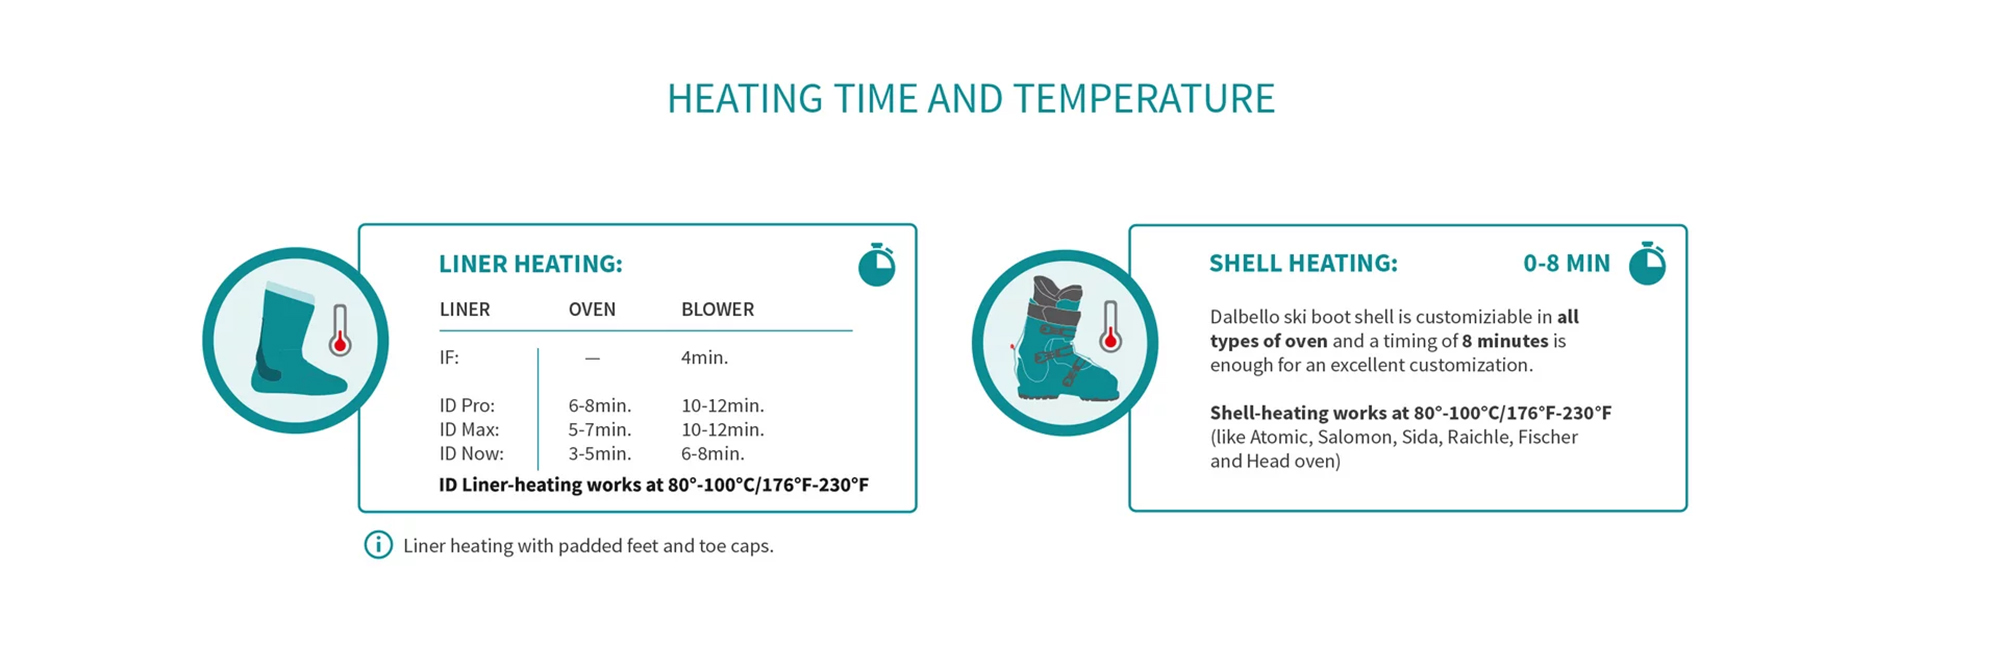 Heating time and temperatures